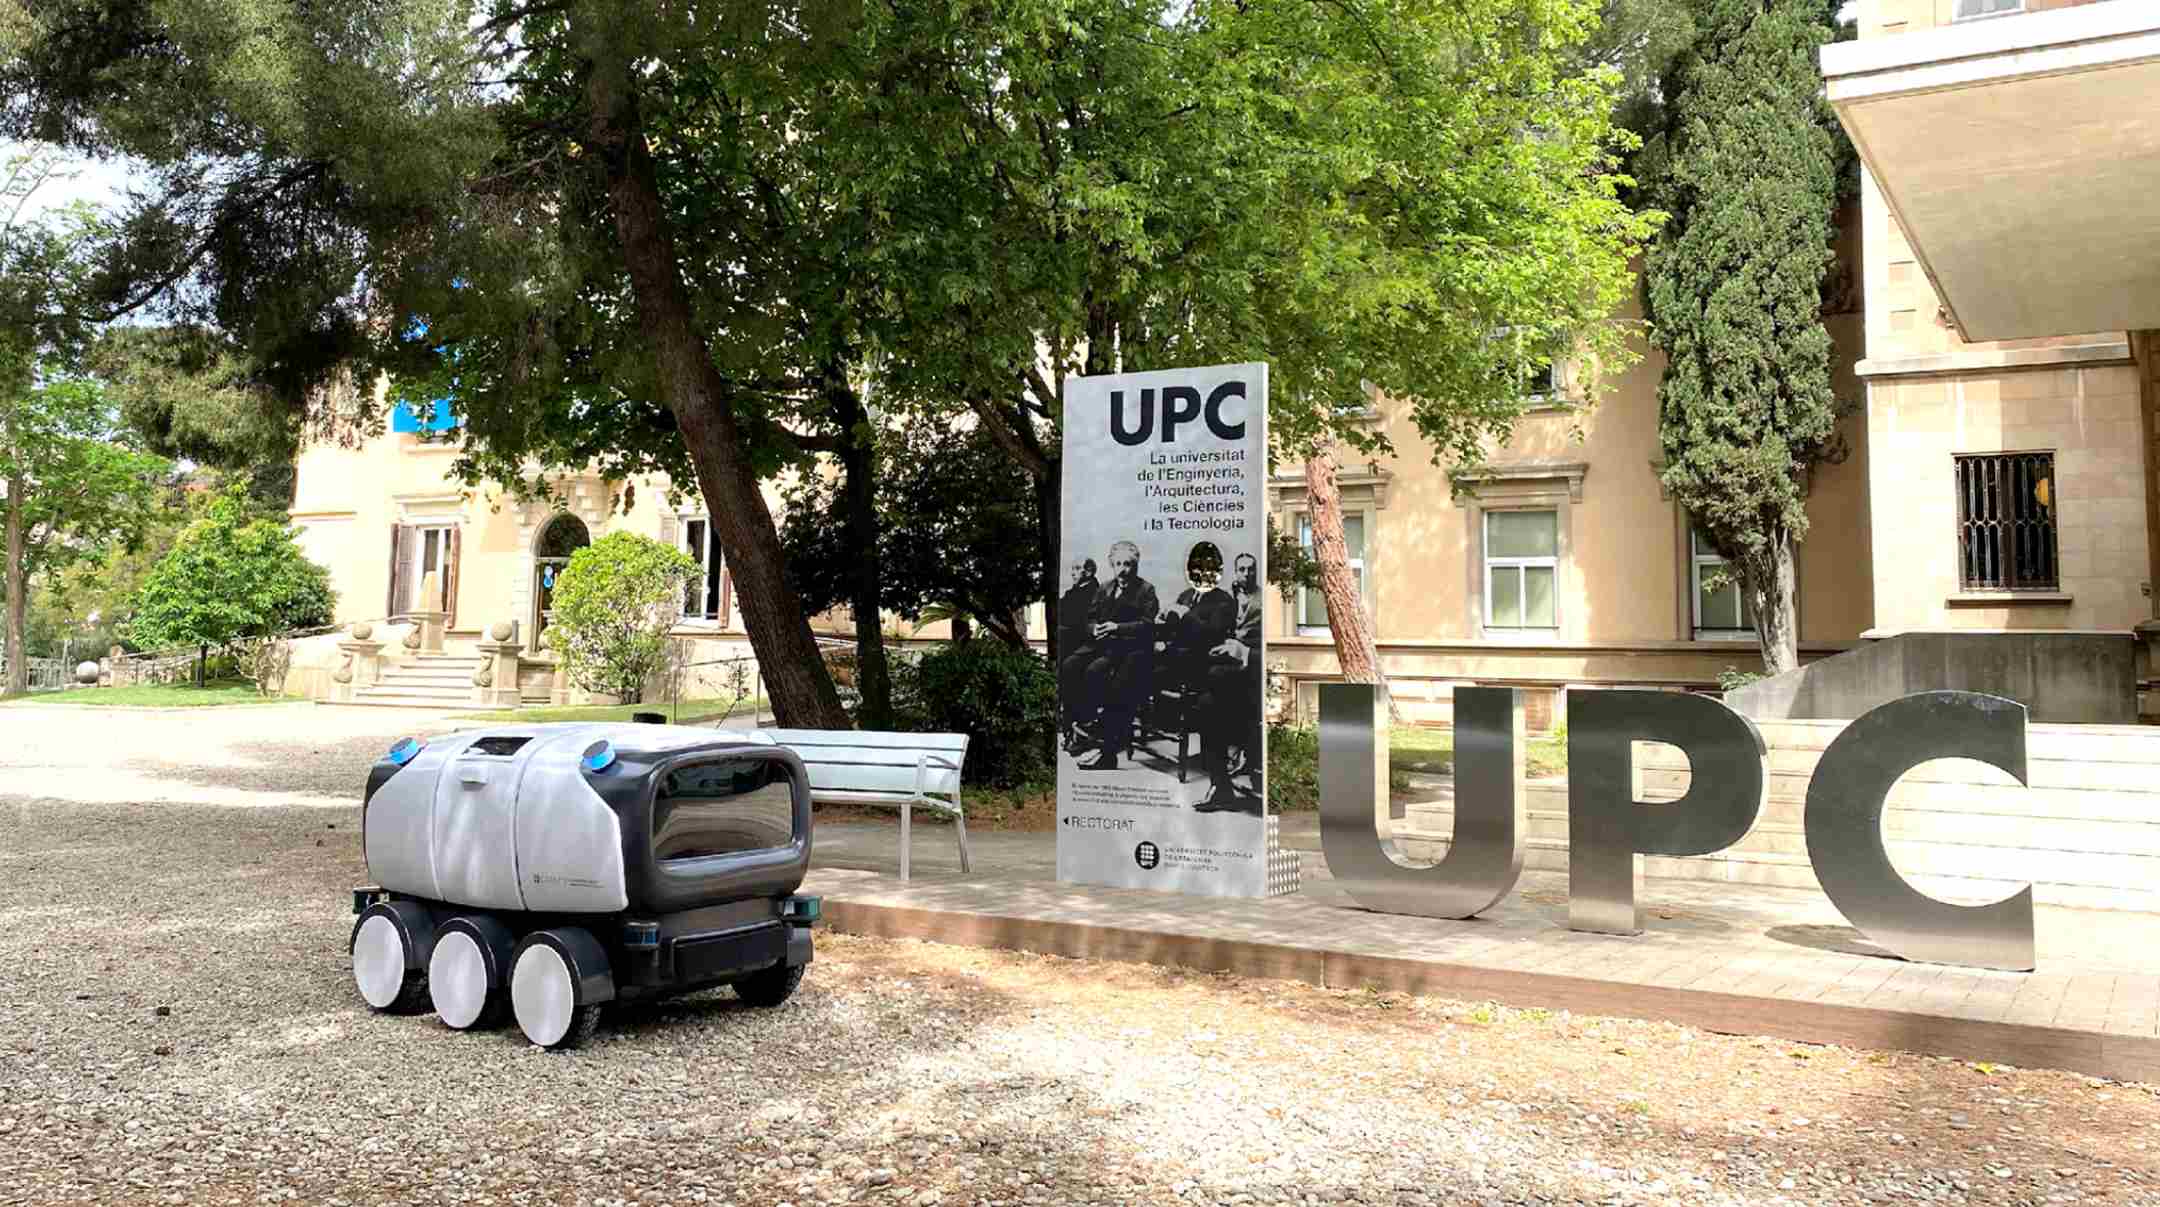 Several autonomous vehicle and robot are currently under development in various parts of the world. (UPC)